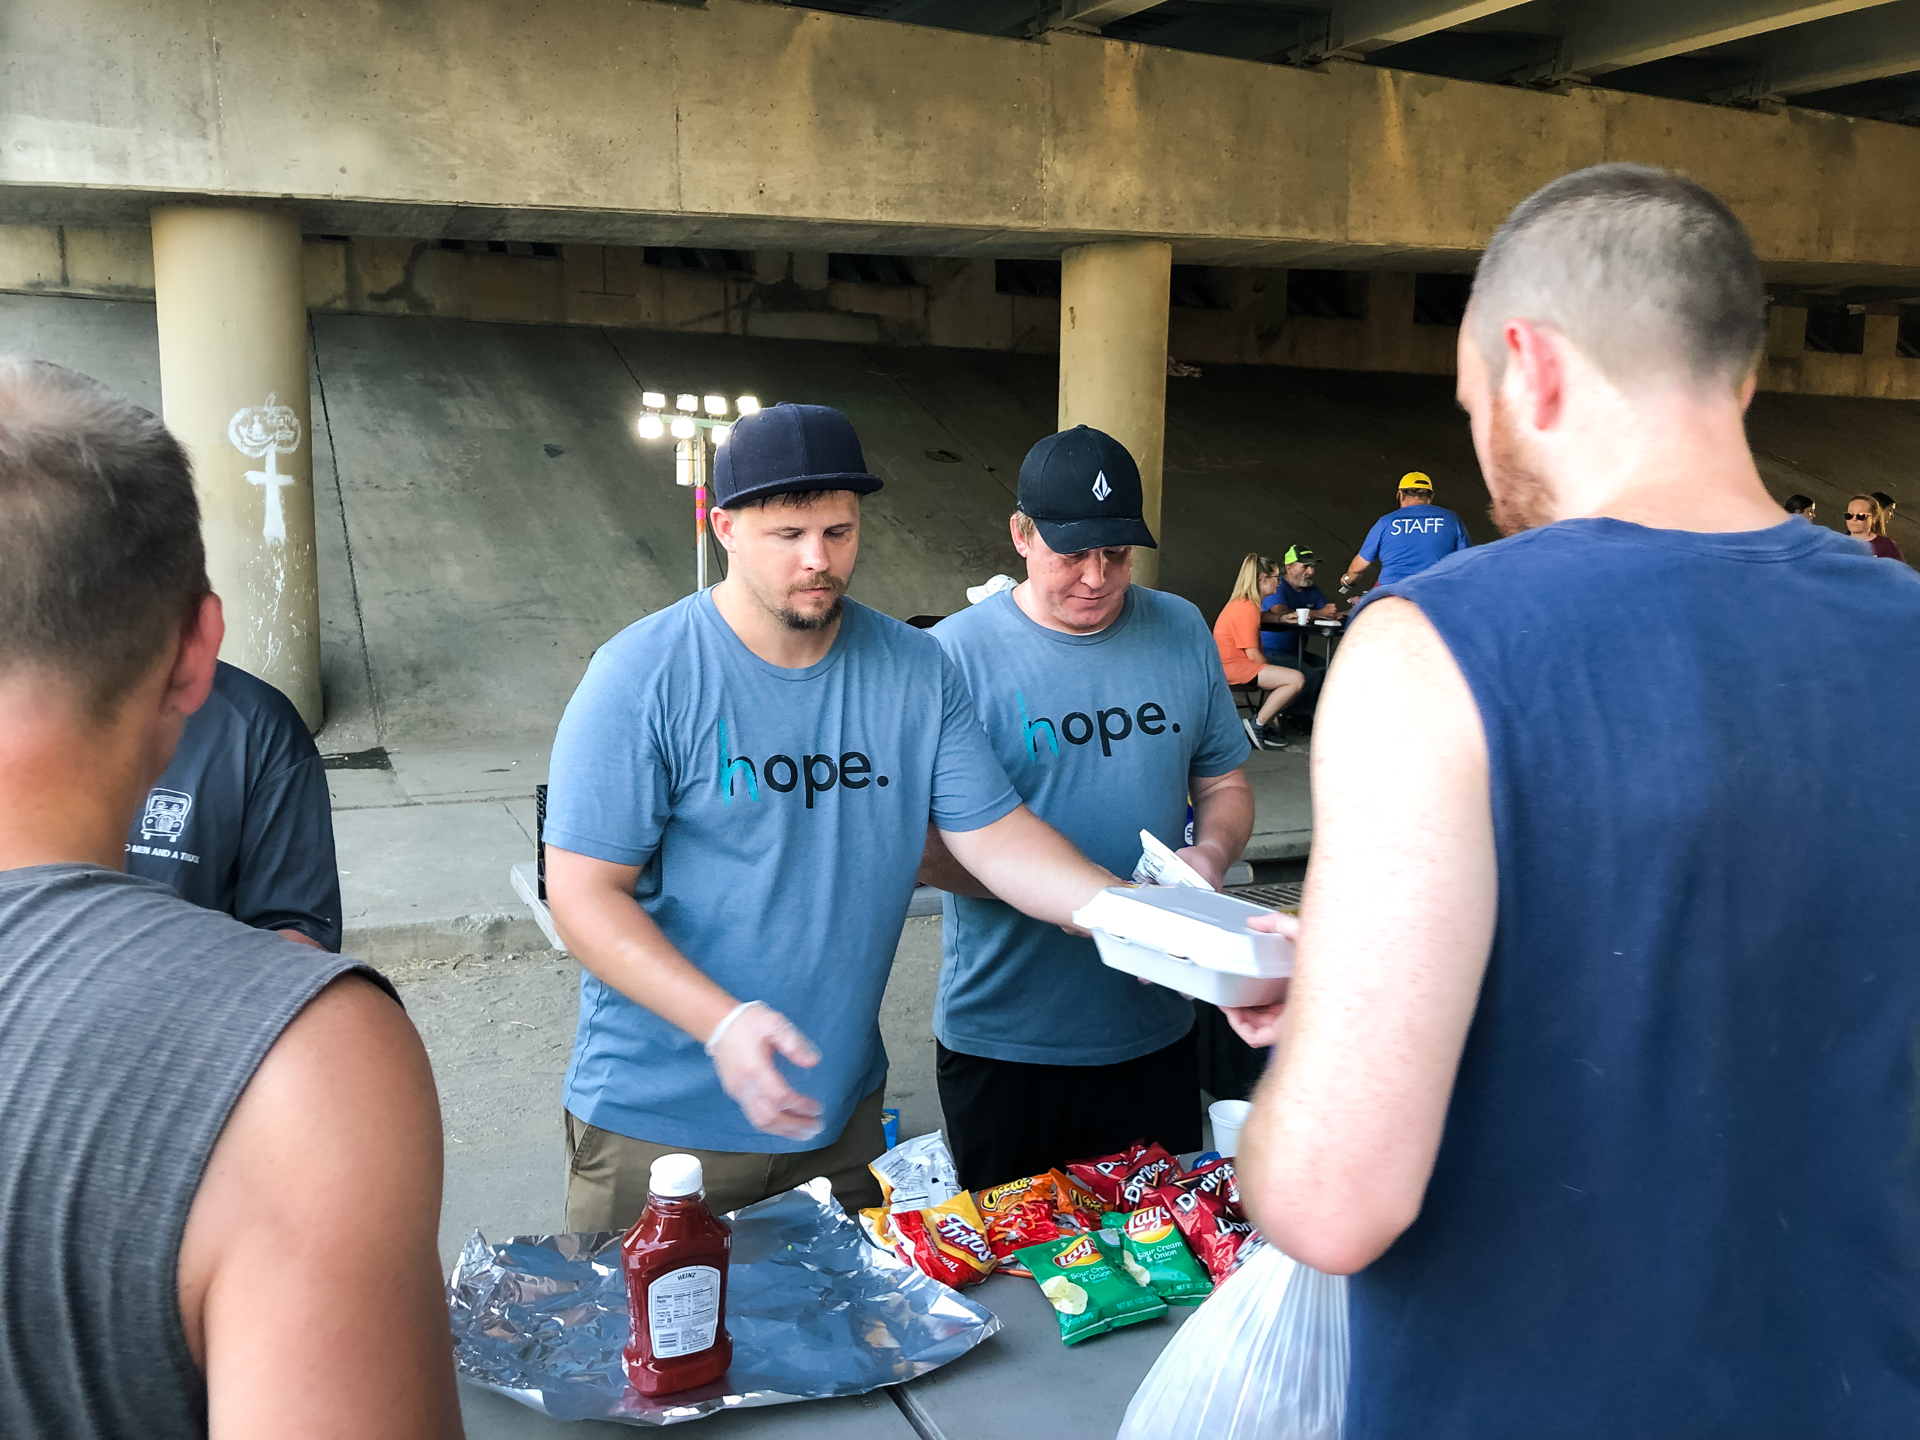 A man from the Sangha community volunteering at a community event and passing out food.